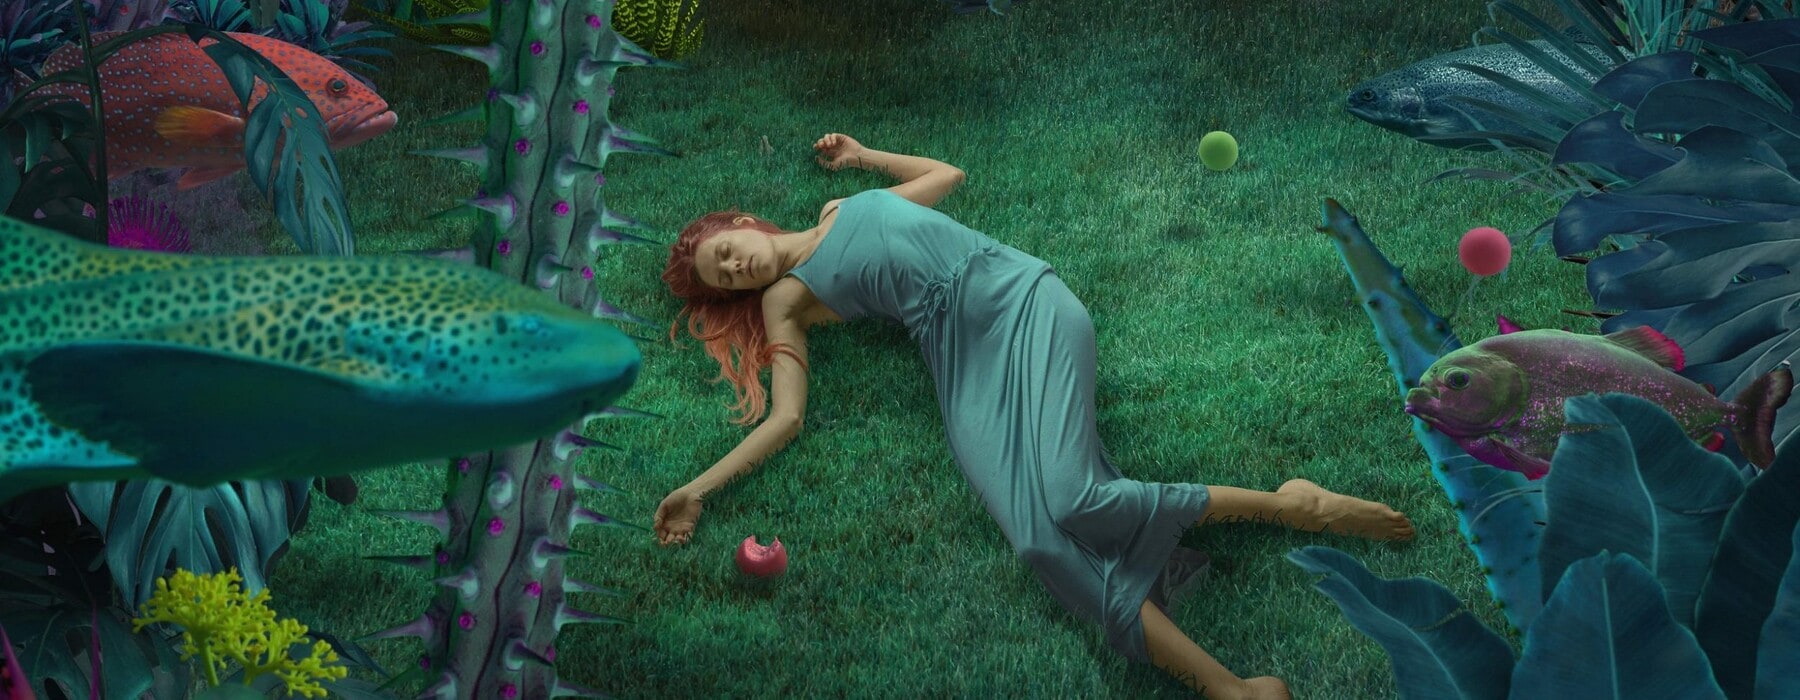 Woman with red hair and green dress lying on grass underwater with fish swimming by